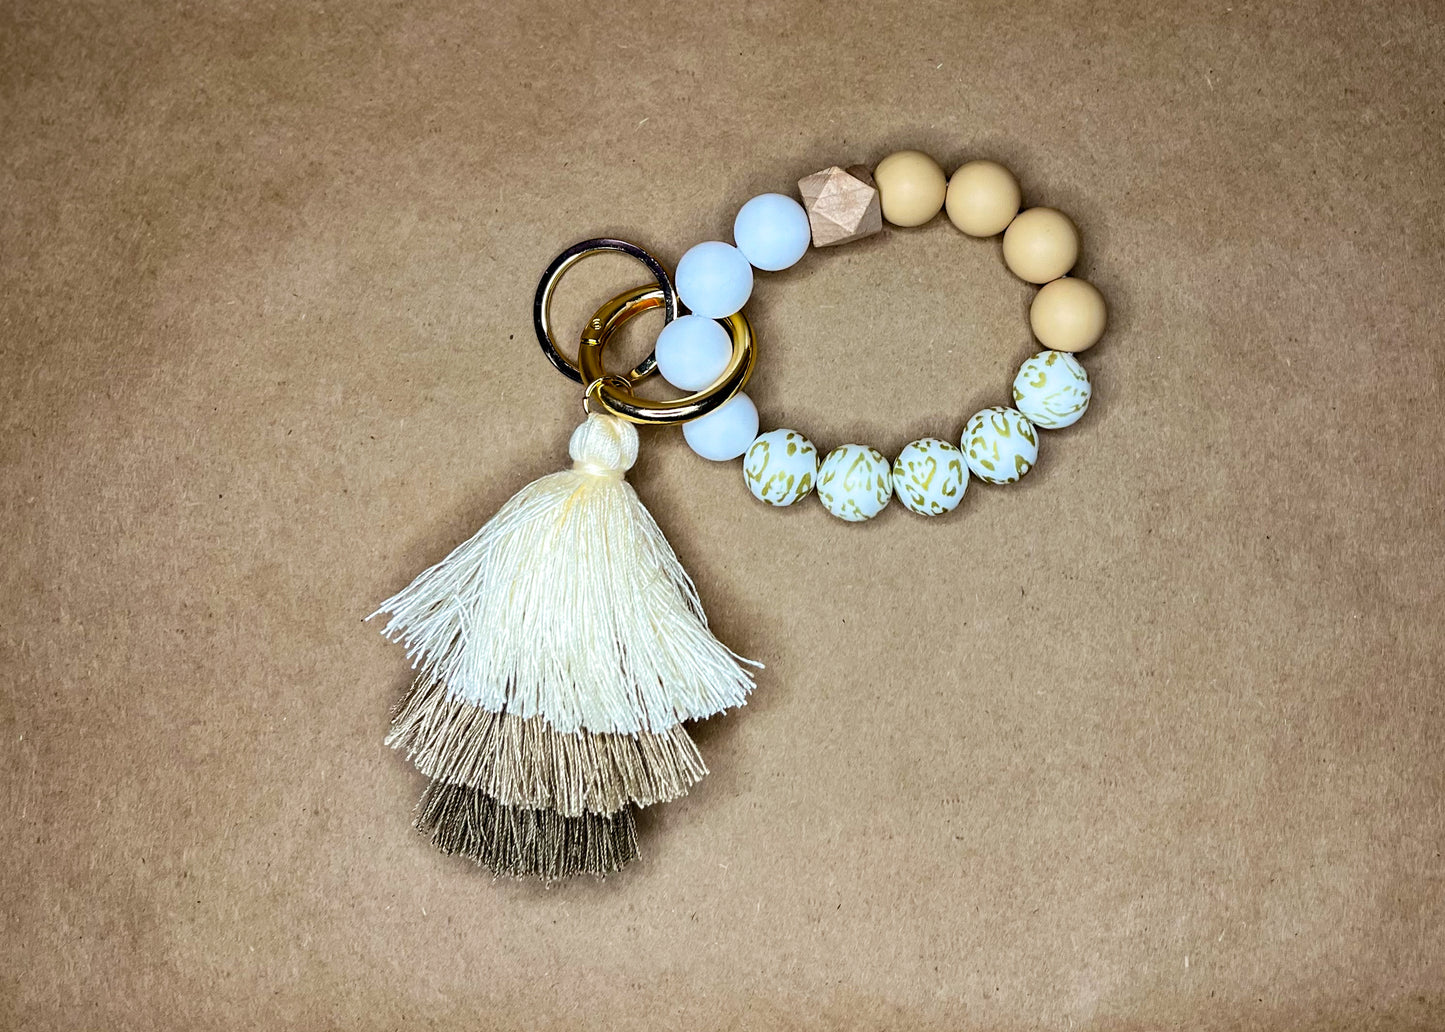 Beaded Wristlet Keychain with Ombre Tassel - White Leopard